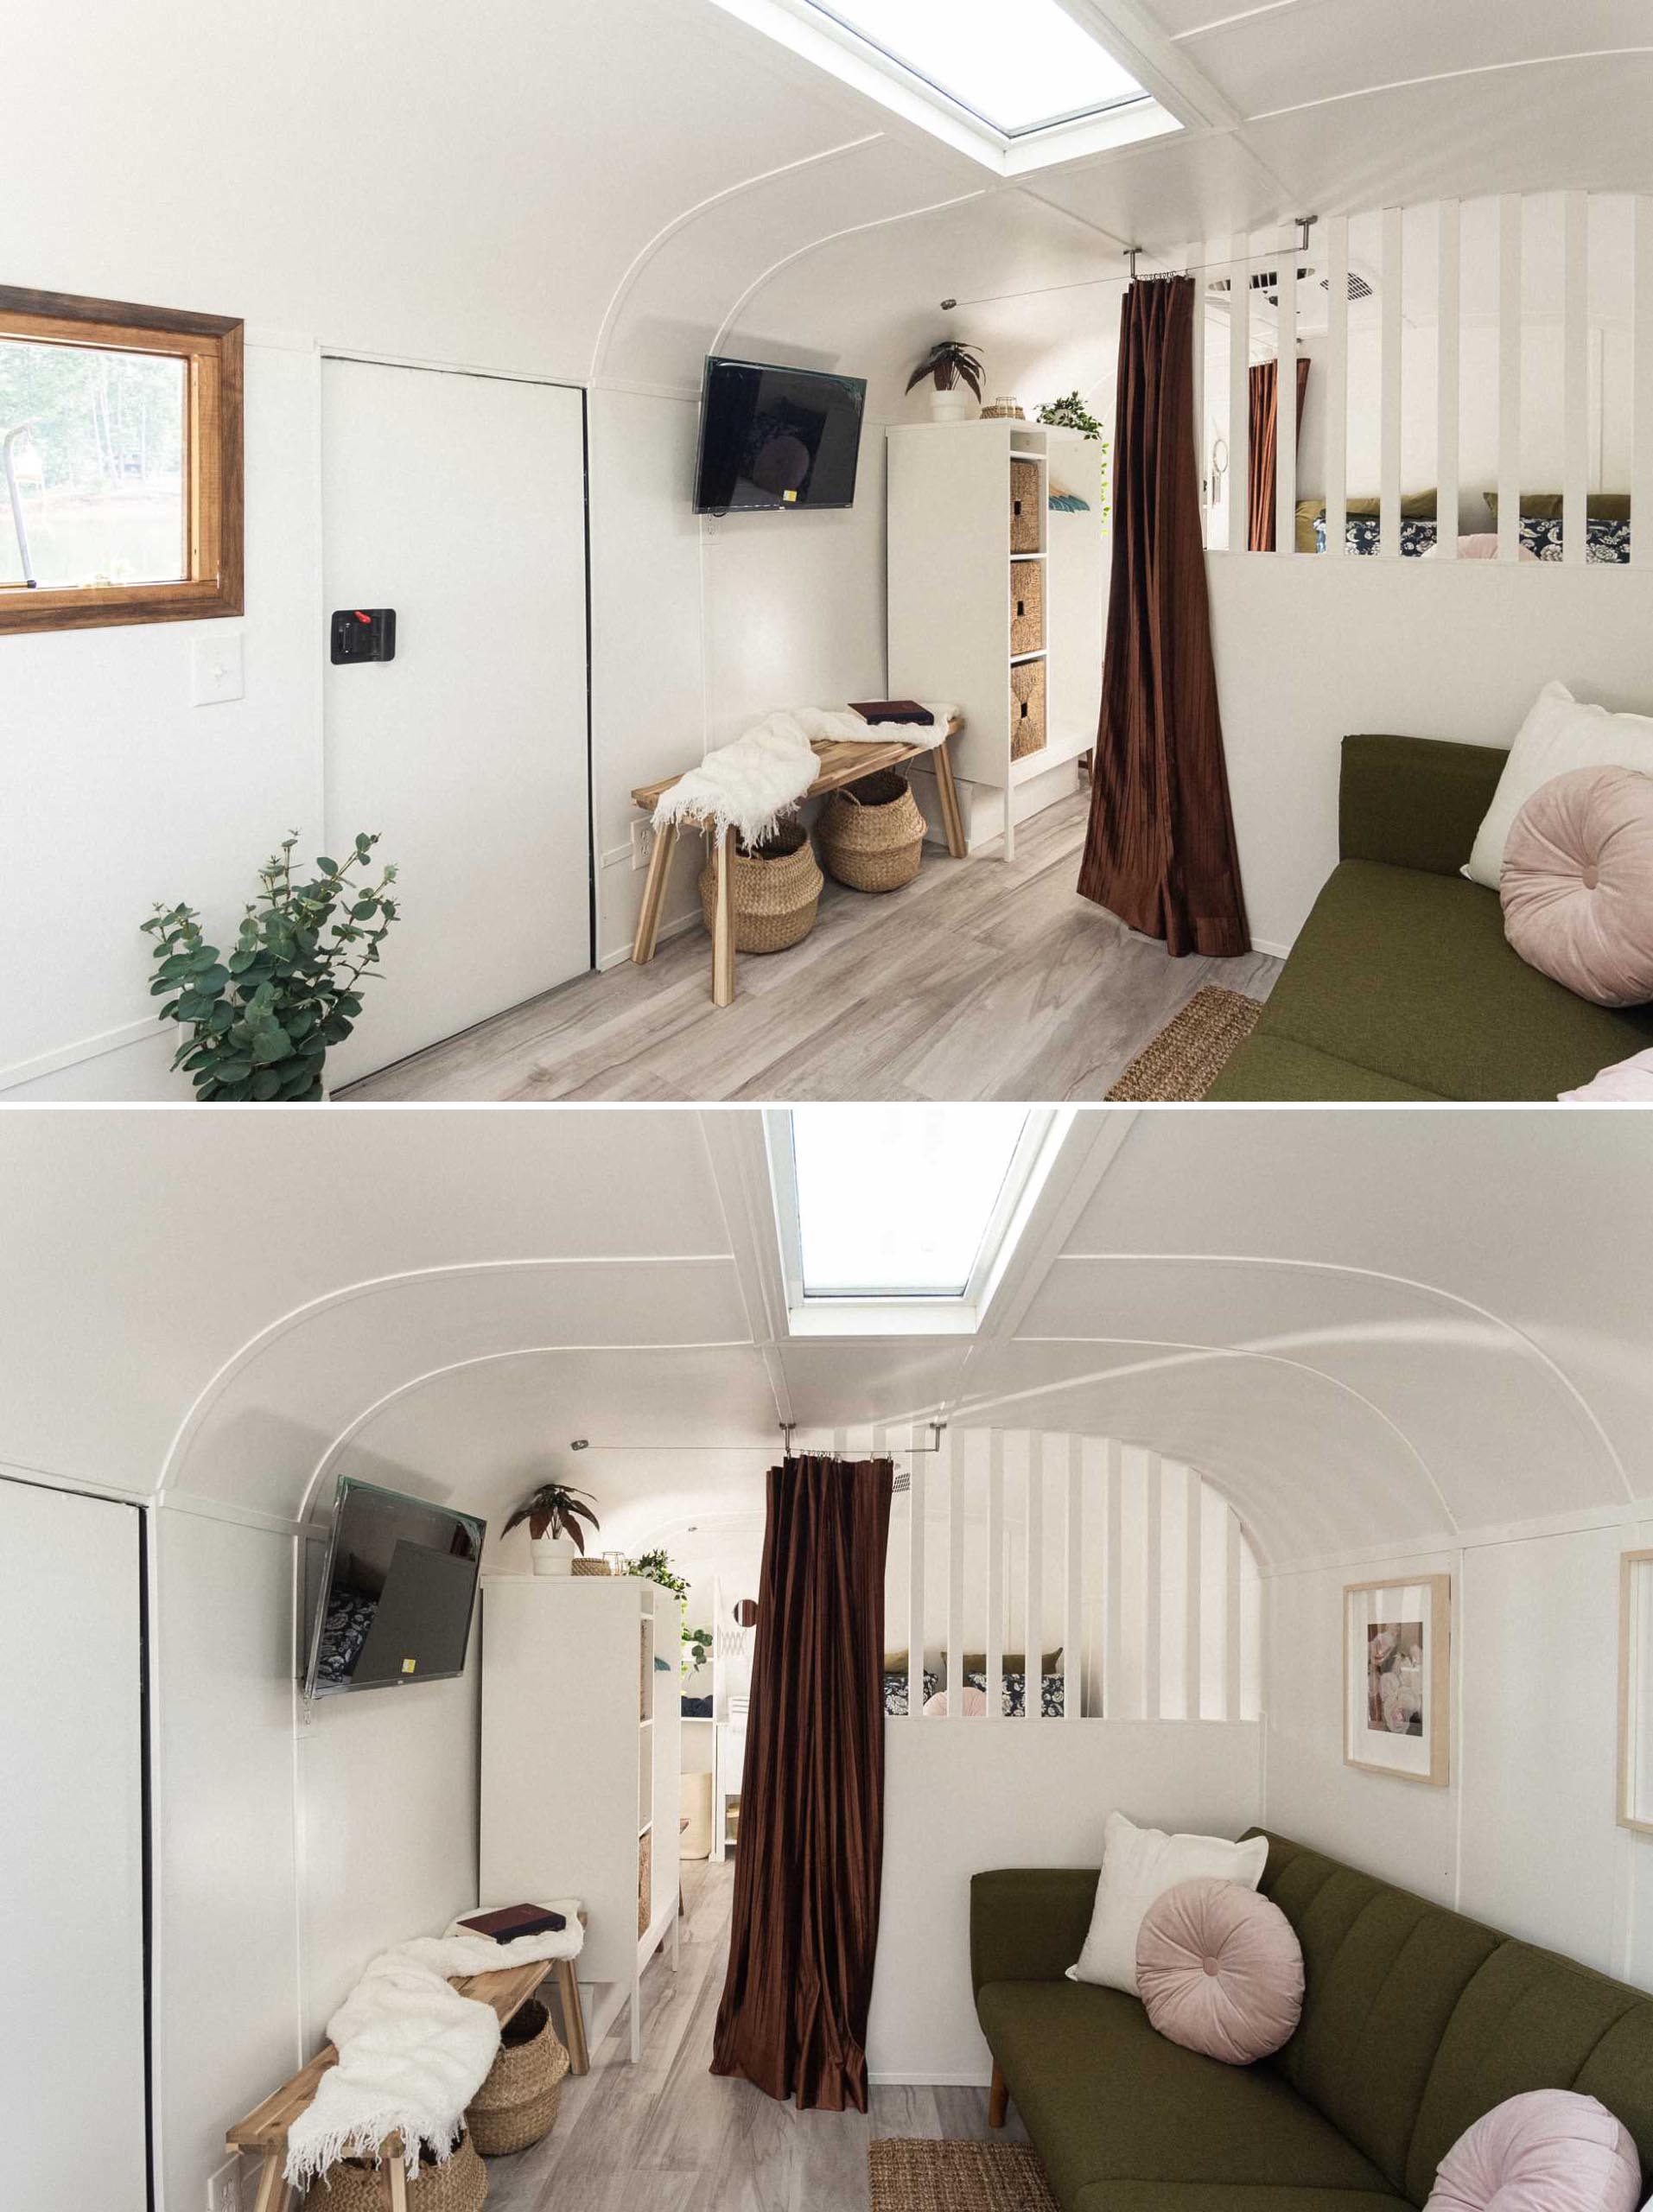 The entryway of this remodeled vintage travel trailer includes a bench with a couple of storage baskets, and a wall-mounted tv.